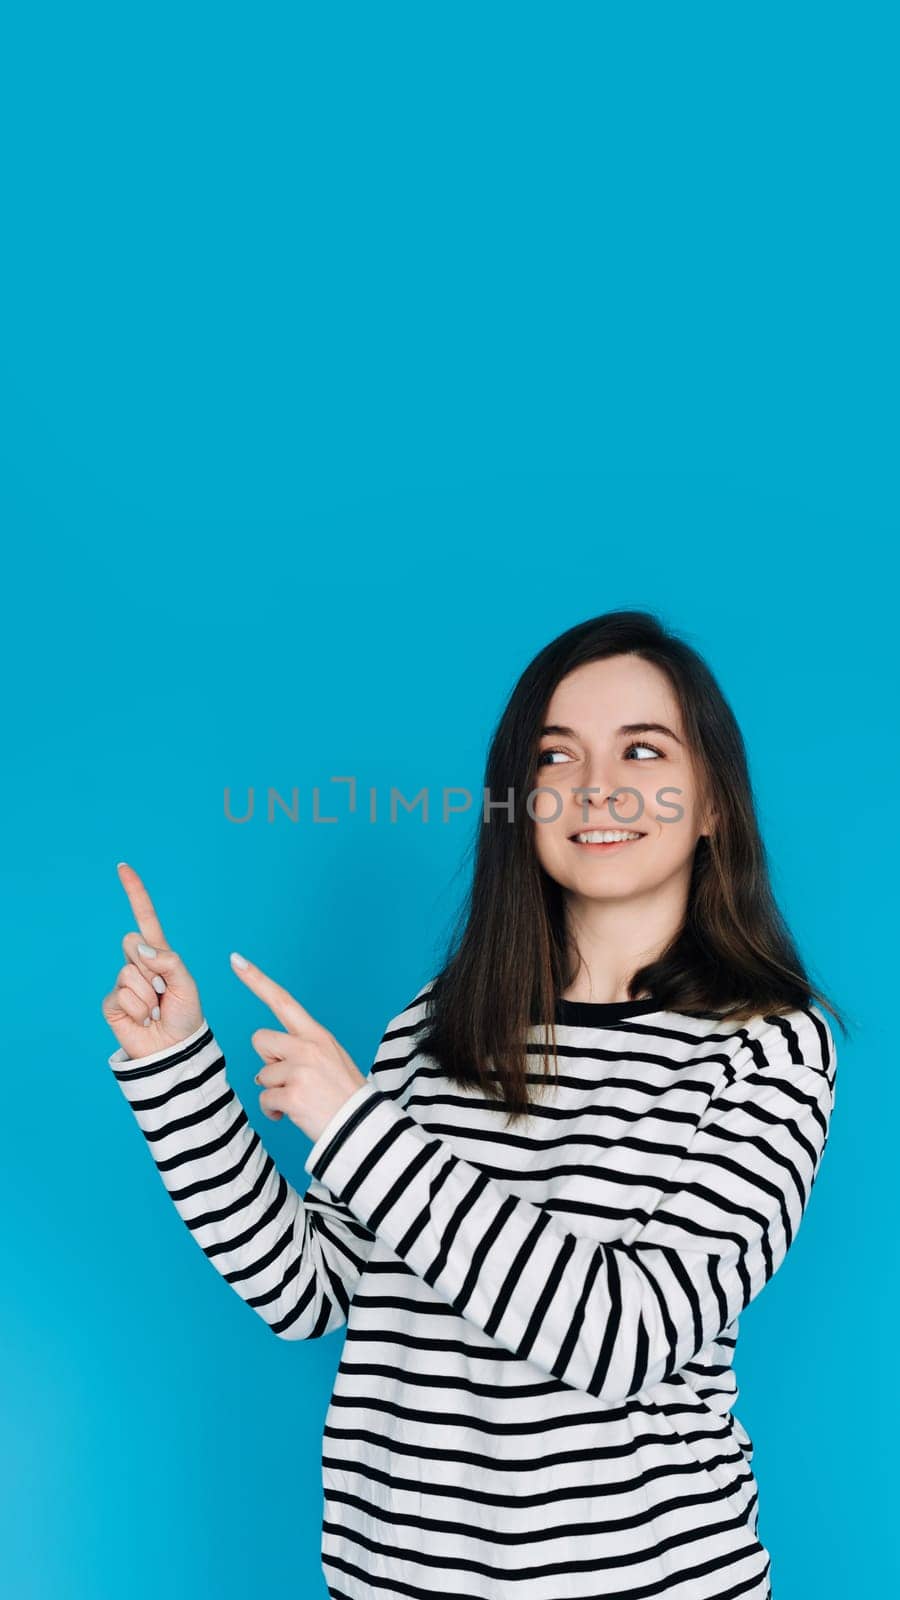 Adorable Girl in Striped Pullover Pointing and Gazing at Empty Space - Charming Young Female Model with Expressive Gestures - Isolated on Blue Background - Perfect for Conceptual, Advertising by ViShark